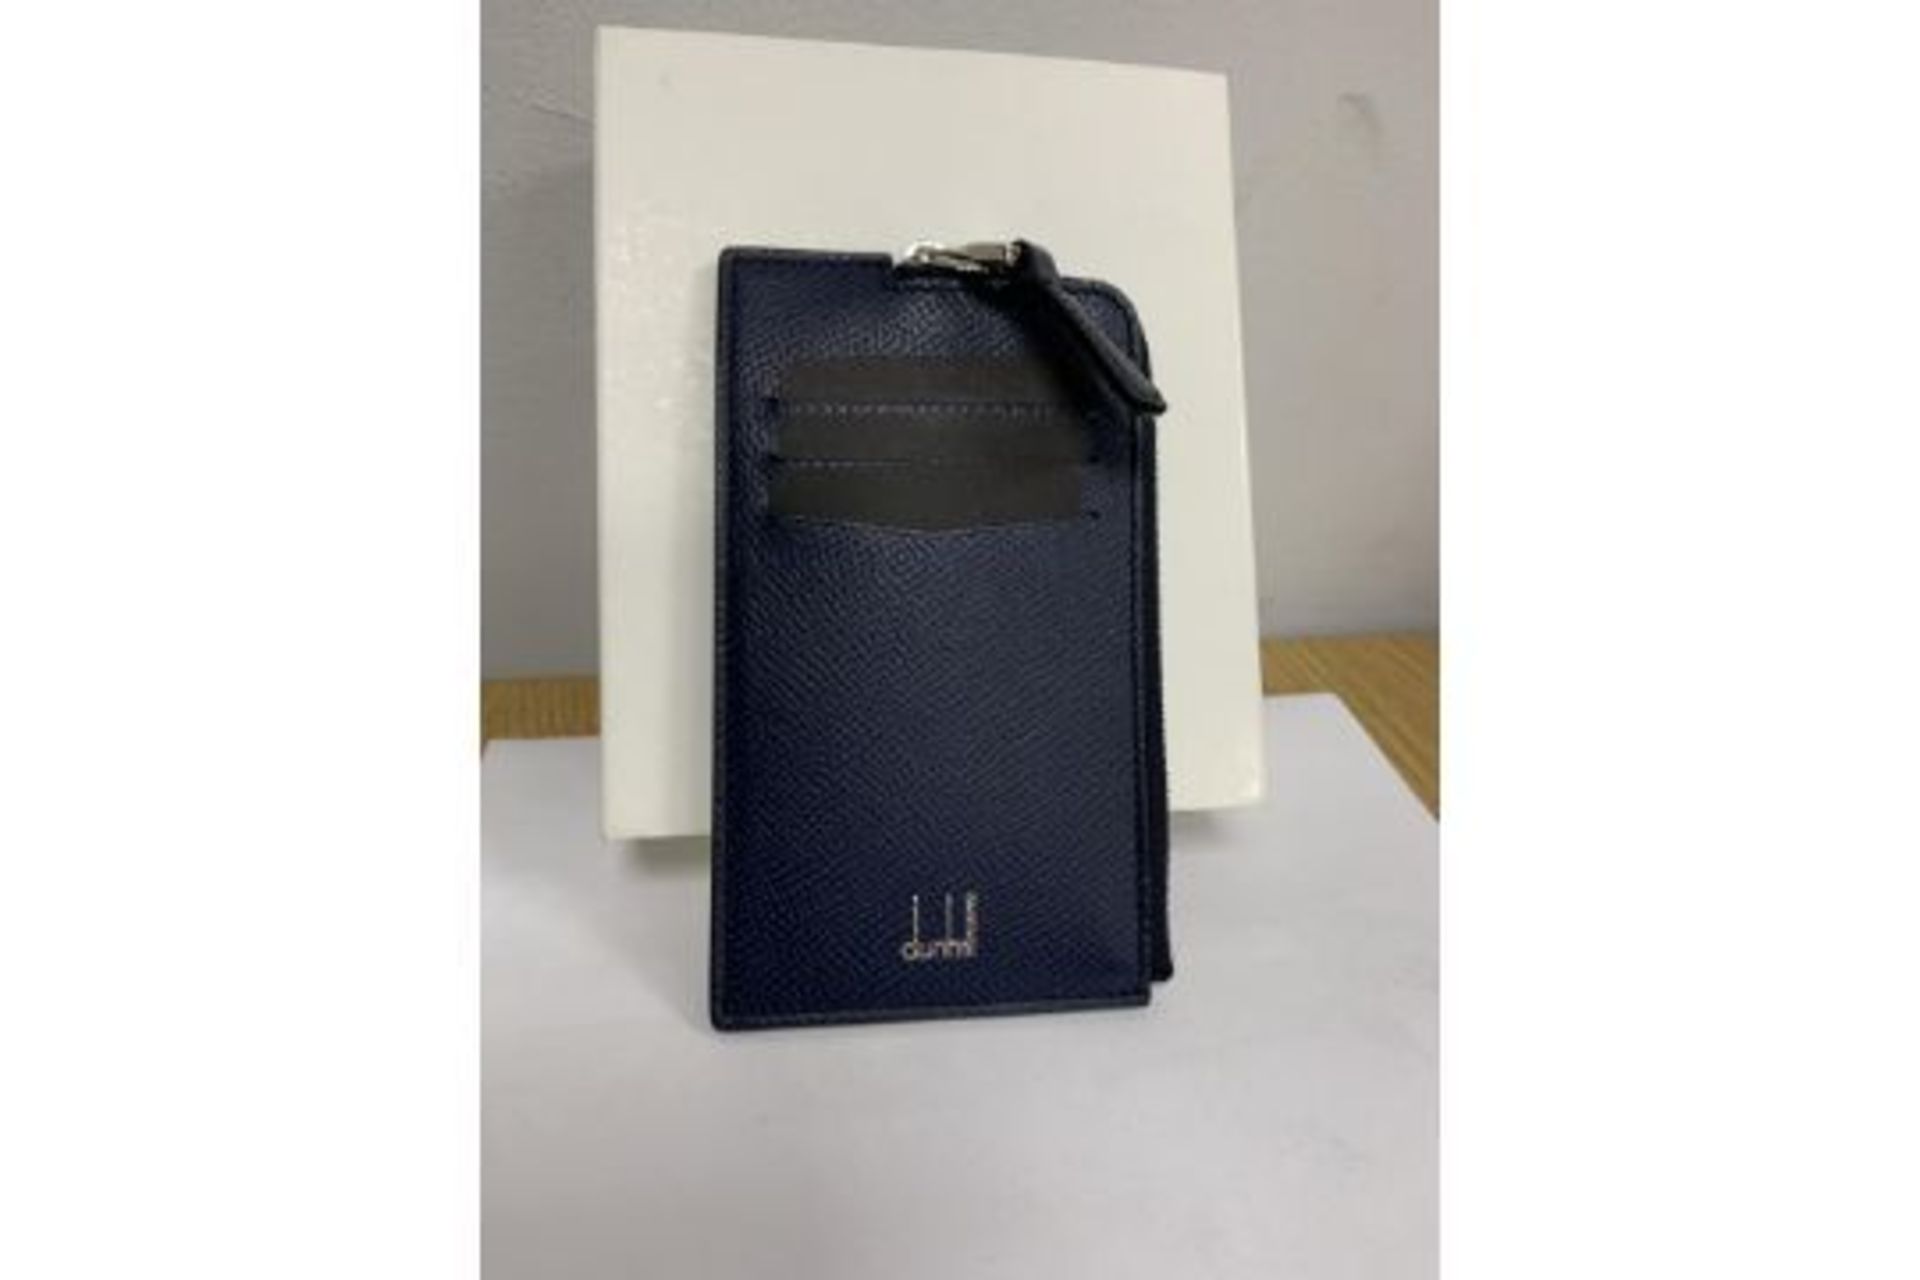 BRAND NEW ALFRED DUNHILL NAVY CADOGAN ZIP CARD CASE (2239) RRP £195 - 1